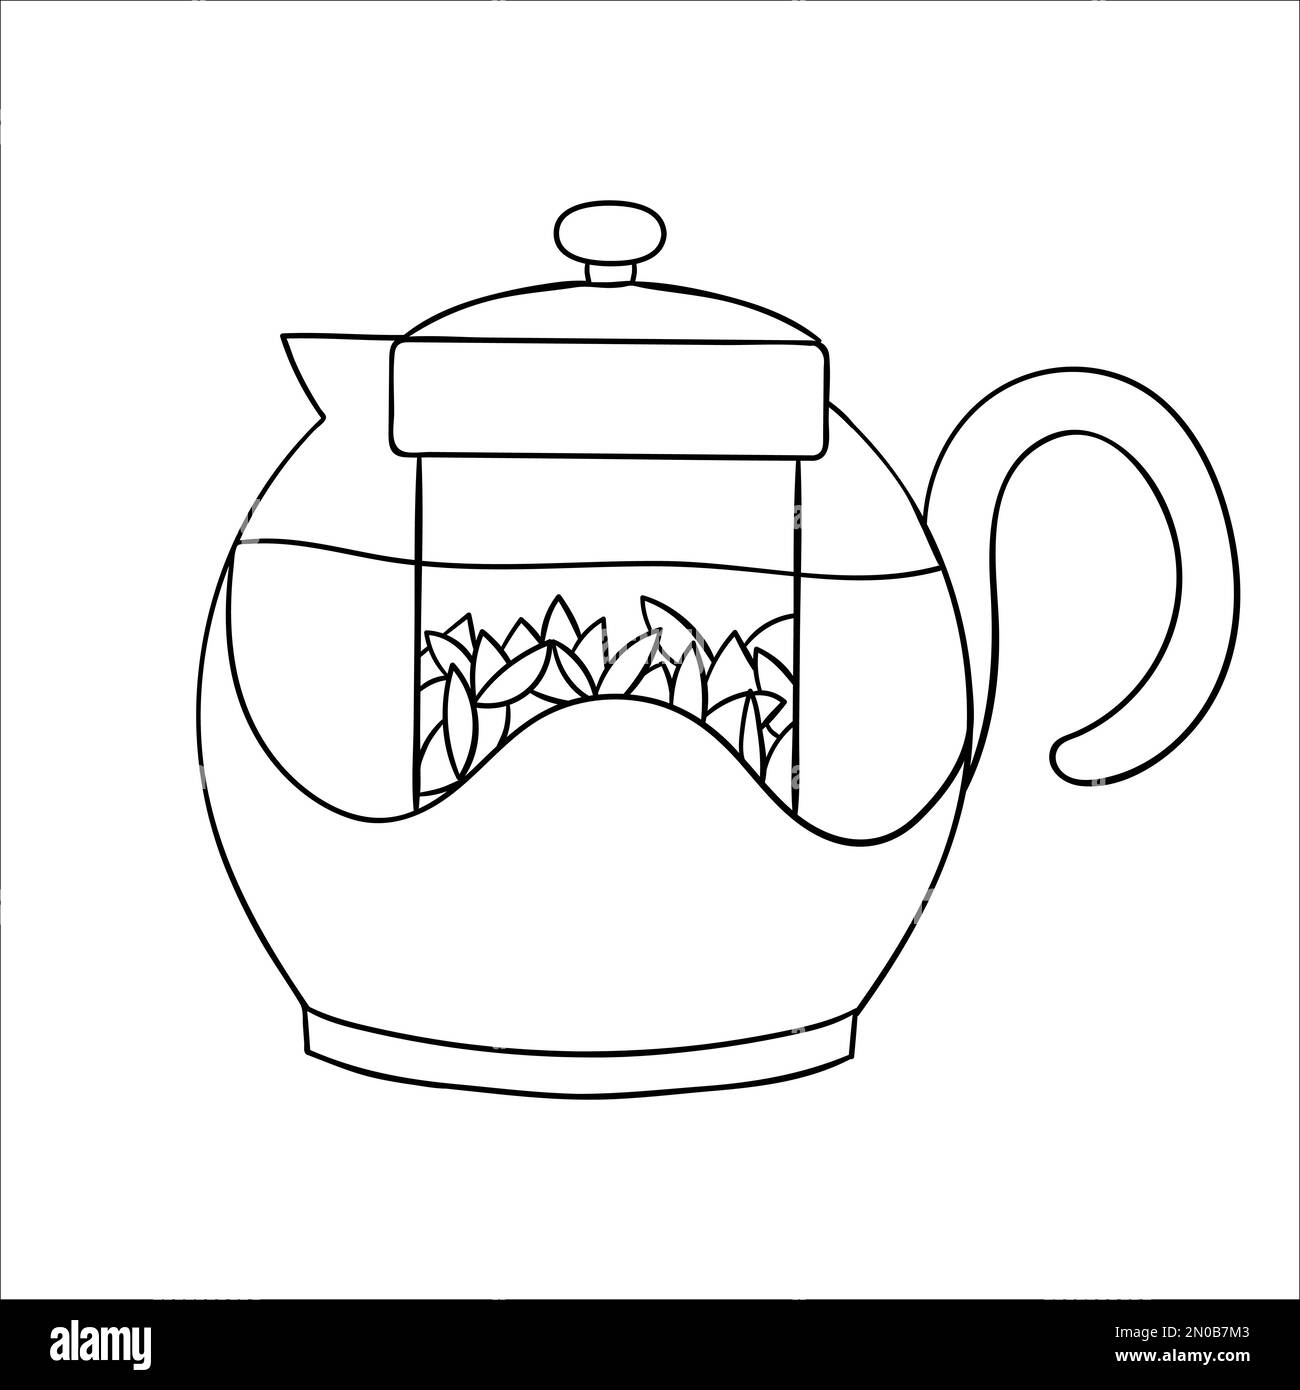 https://c8.alamy.com/comp/2N0B7M3/teapot-line-icon-black-and-white-teapot-vector-illustration-linear-art-kettle-isolated-on-white-background-doodle-style-kitchen-equipment-2N0B7M3.jpg